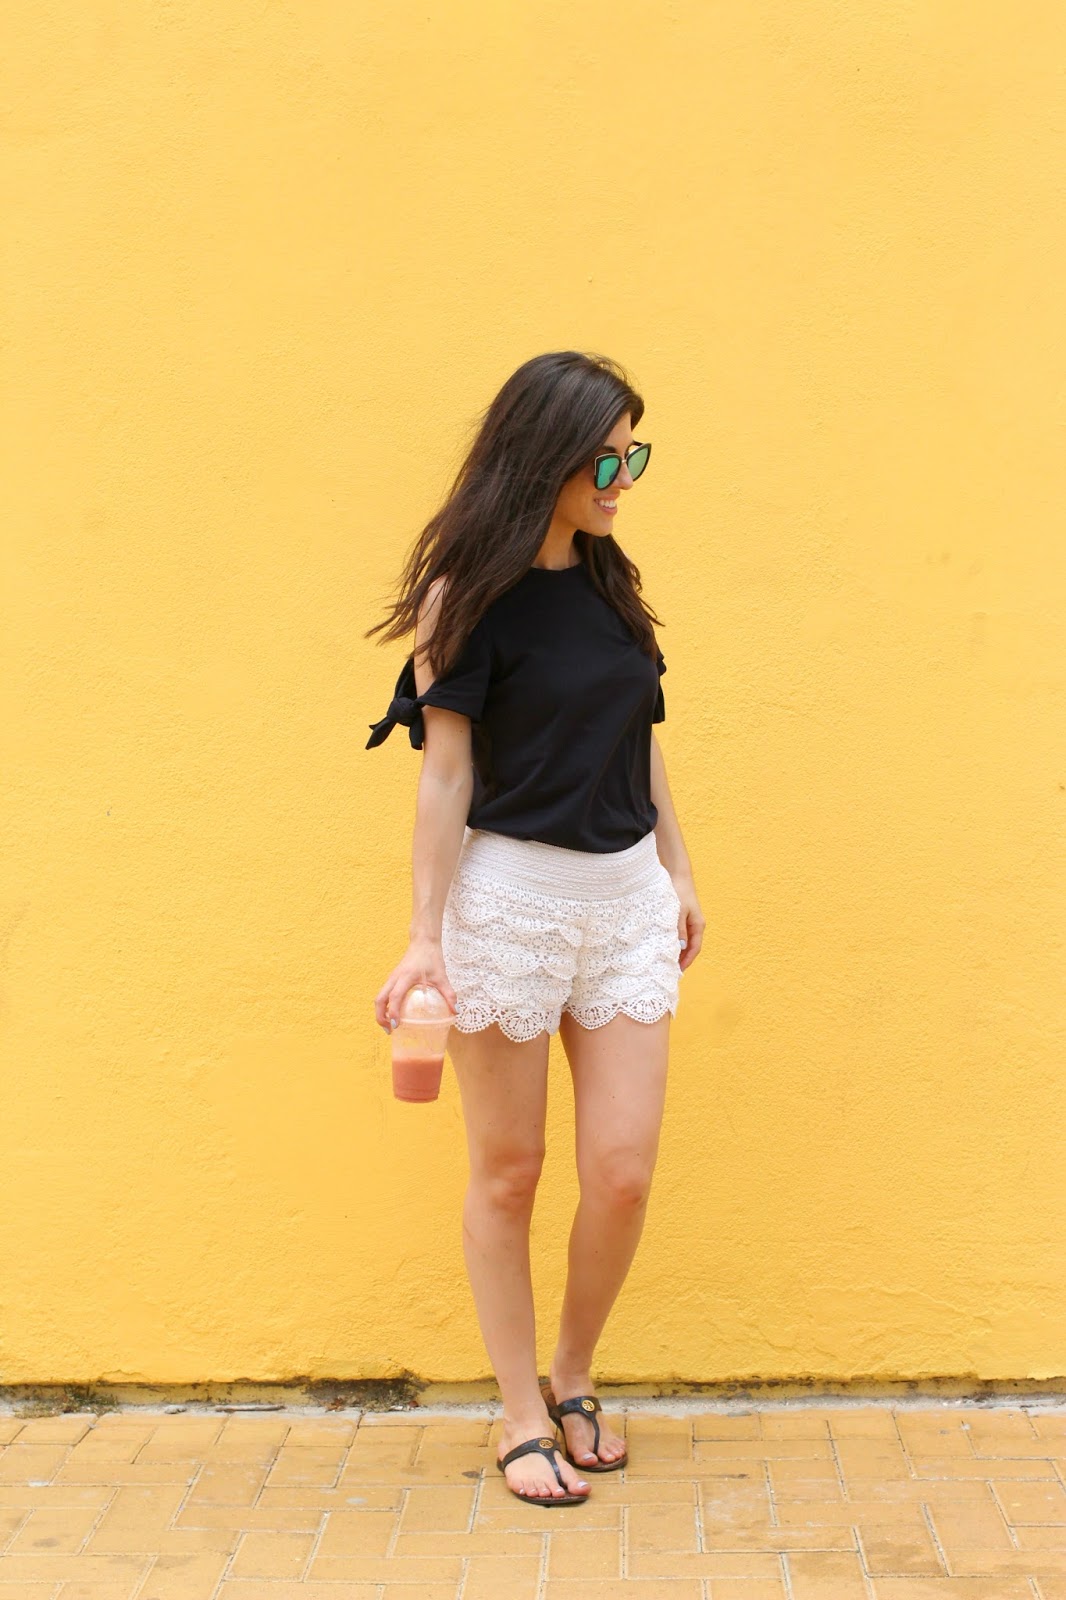 Beautifully Candid: Lace Shorts With Cold Shoulder Top and Exploring ...